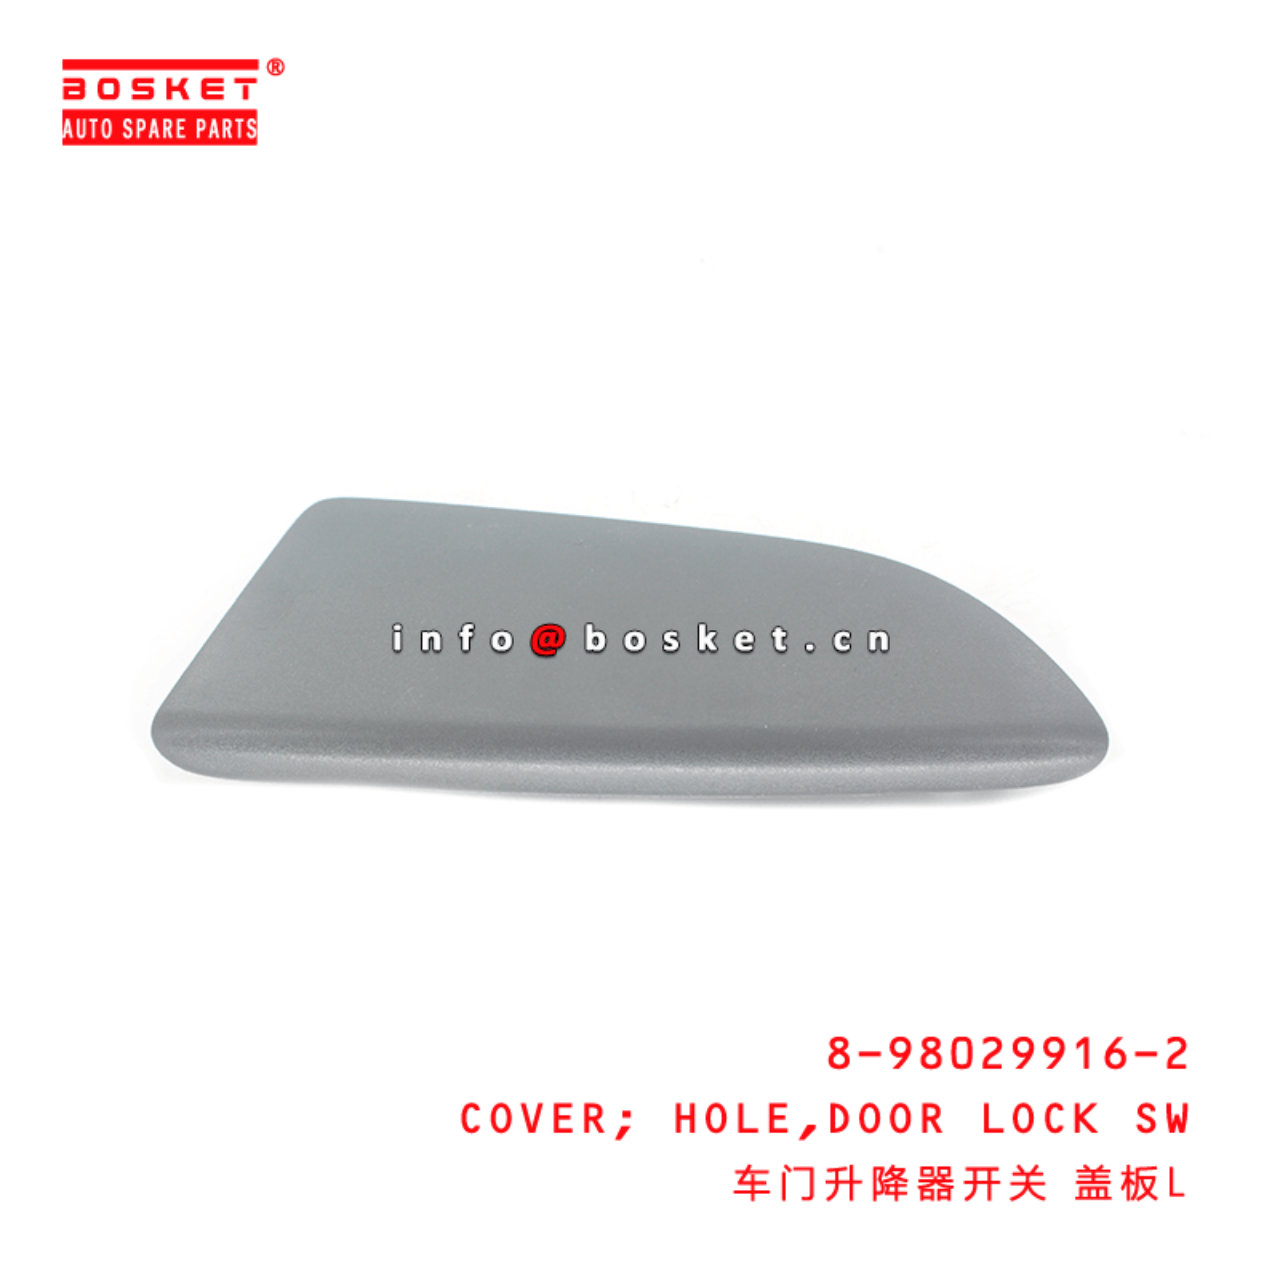 8-98029916-2 Door Lock Switch Hole Cover 8980299162 Suitable for 